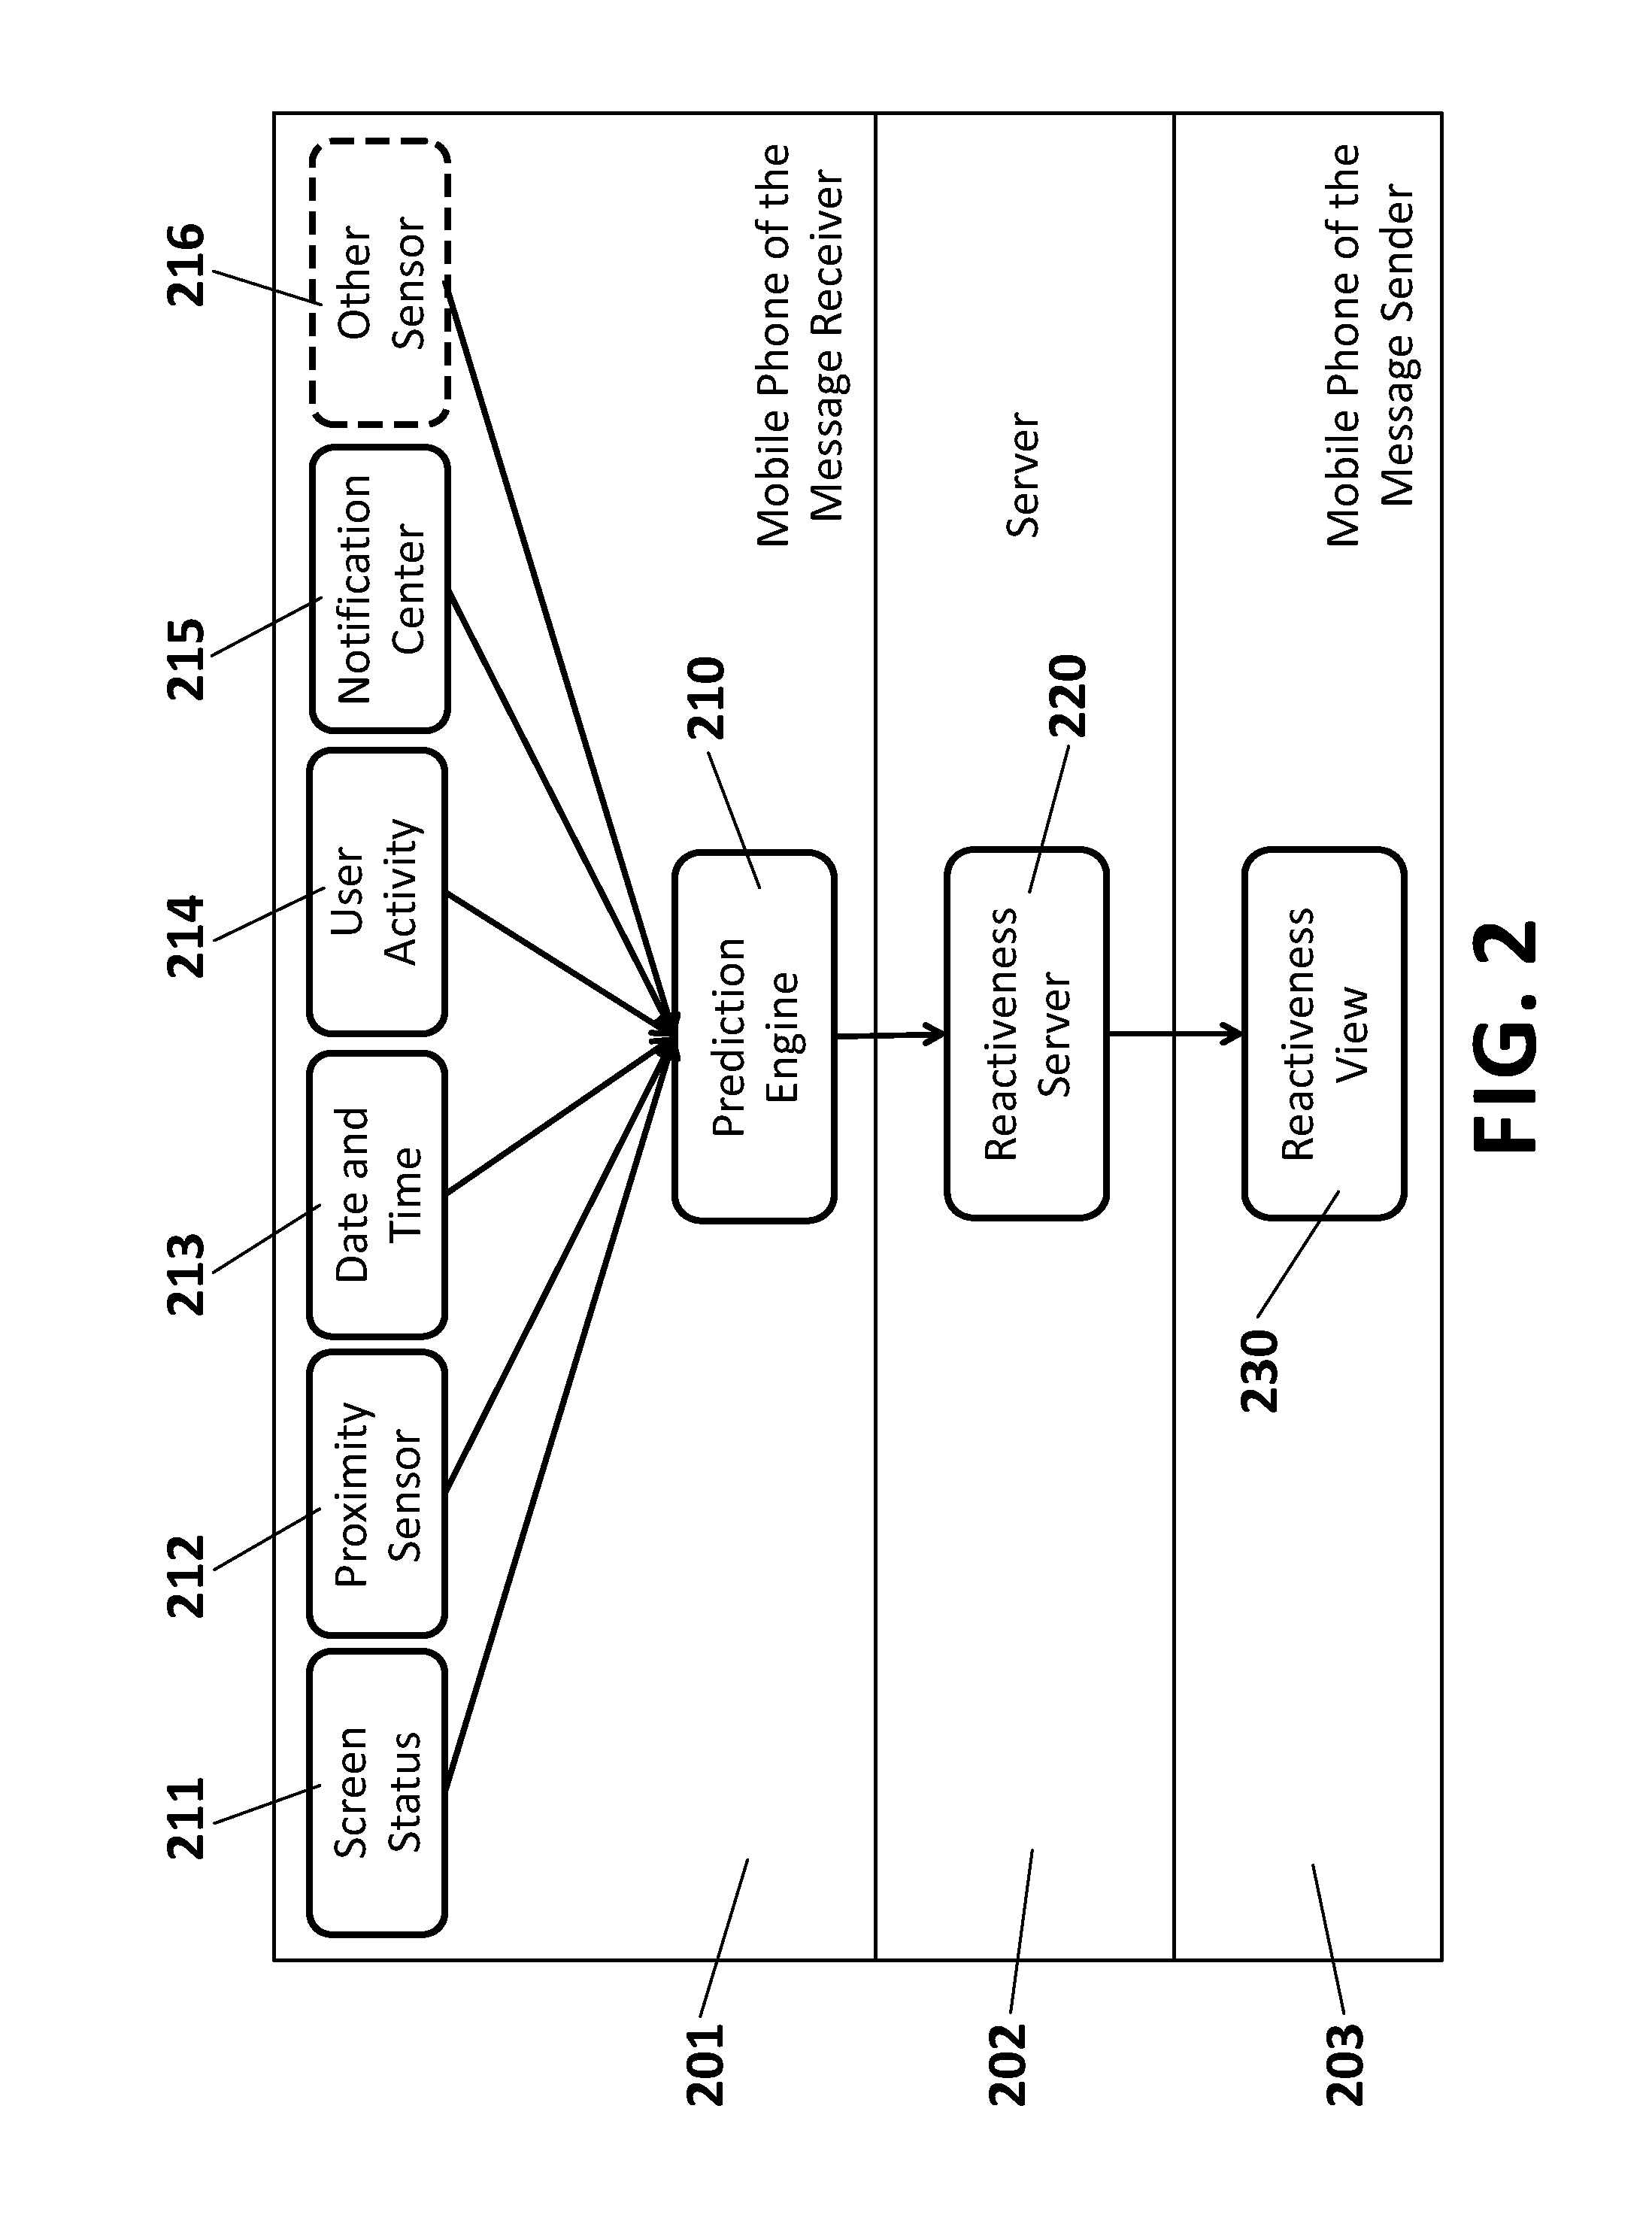 Method for predicting reactiveness of users of mobile devices for mobile messaging